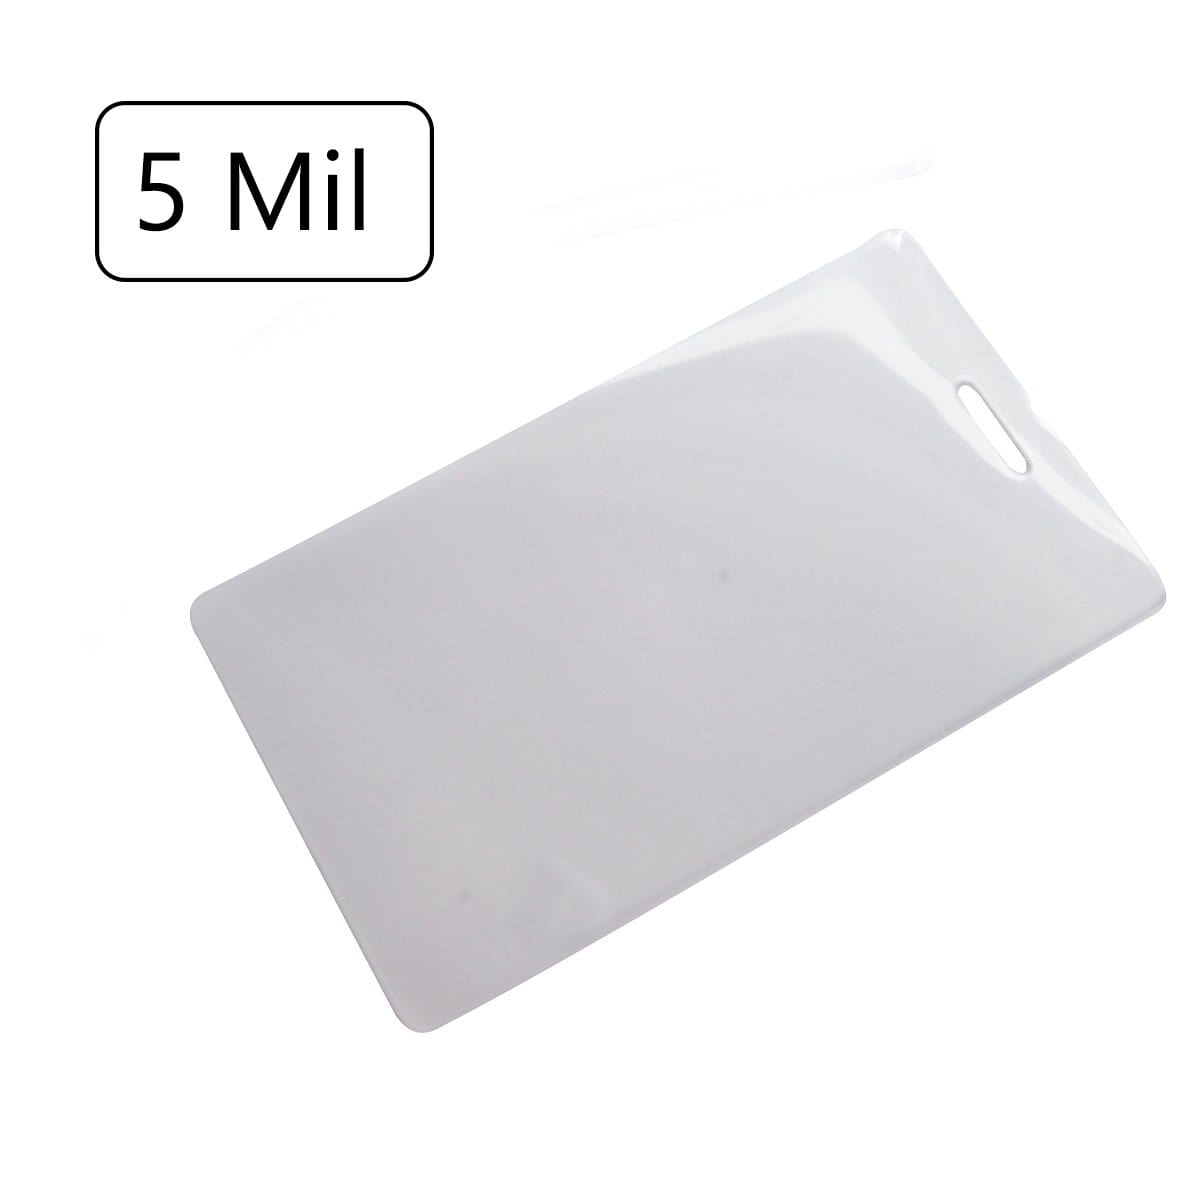 5 Mil Light Duty Laminating Pouch for  2.5" x 4.25"  Luggage Tags or ID with Vertical Slot Hole LP415